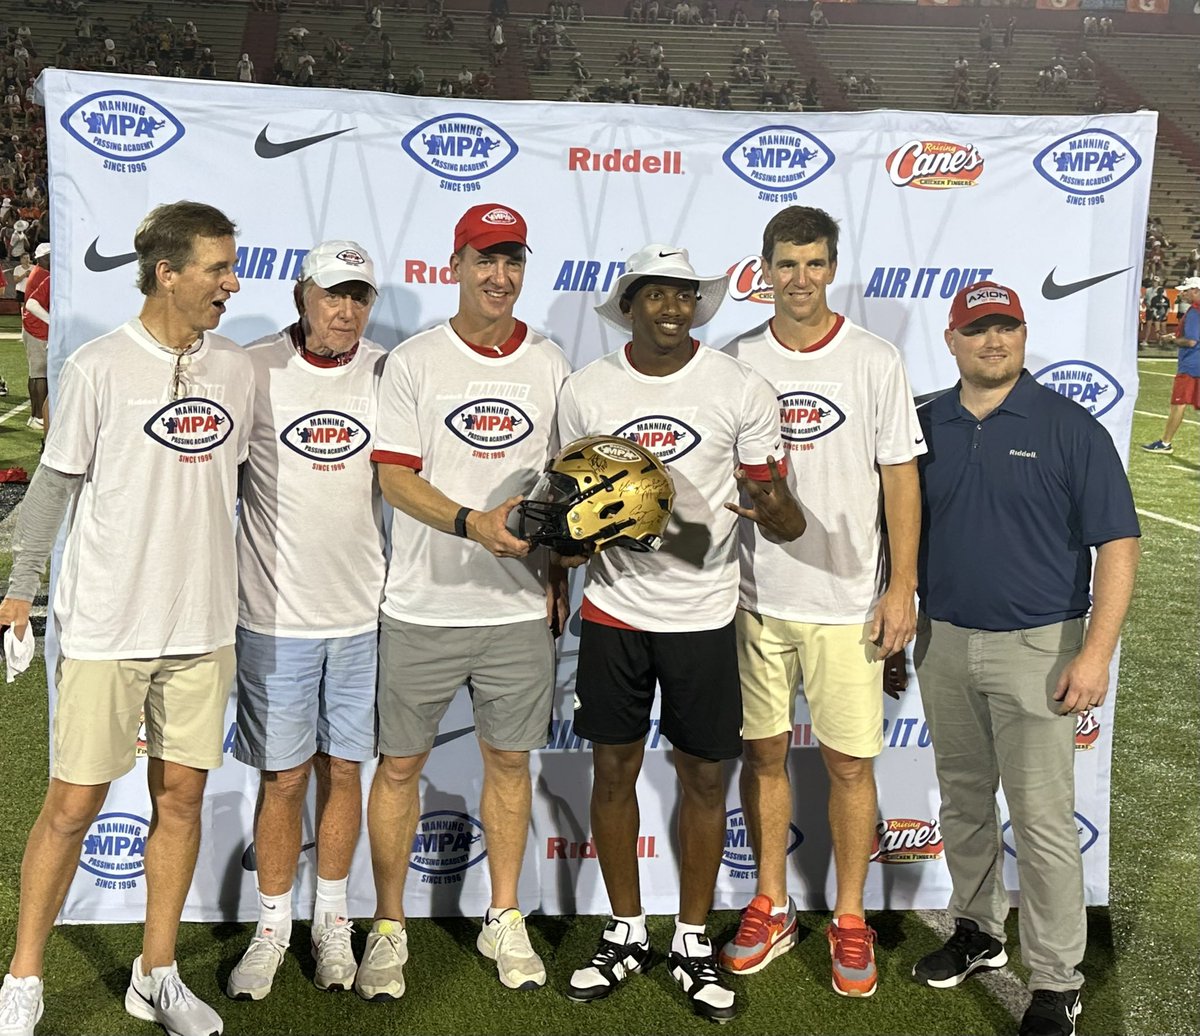 And the champion of the Manning Passing Academy Air it Out skills challenge is @UW_Football QB @themikepenix!